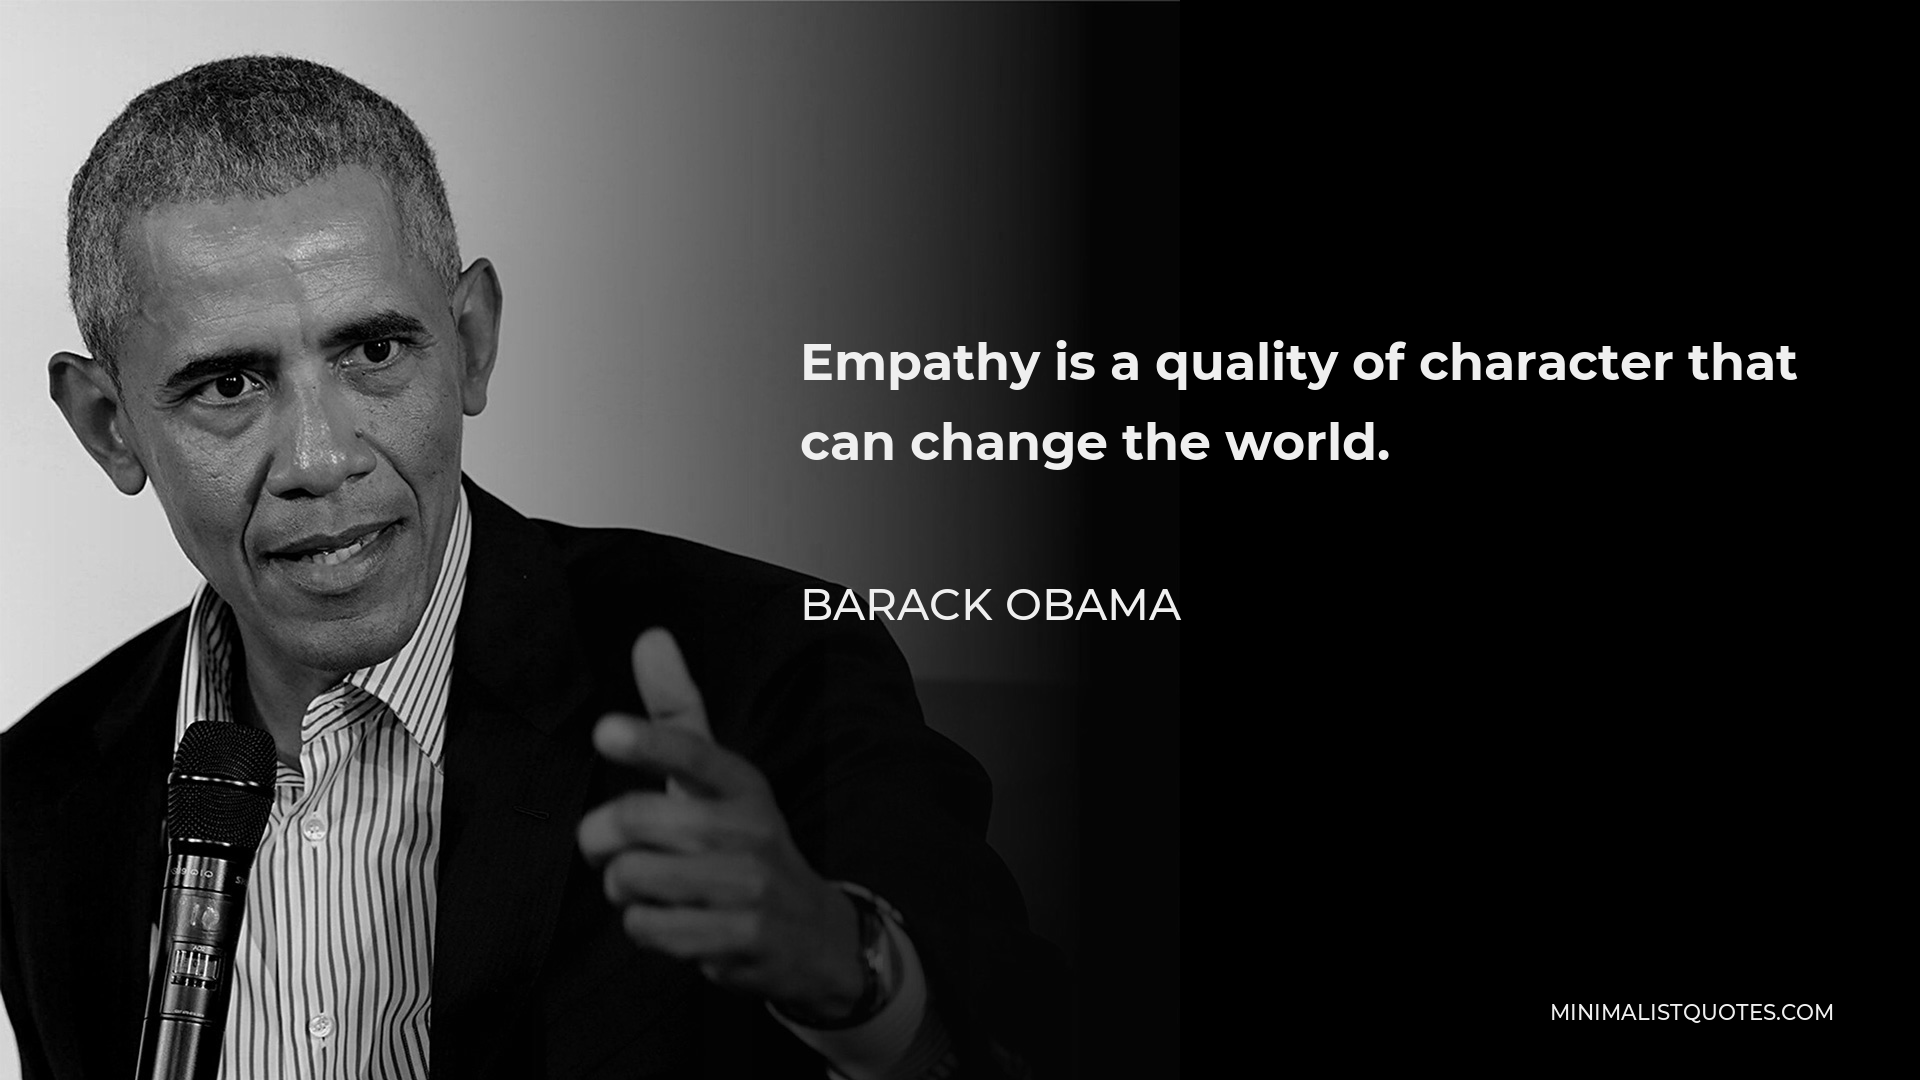 Barack Obama Quote - Empathy is a quality of character that can change the world.